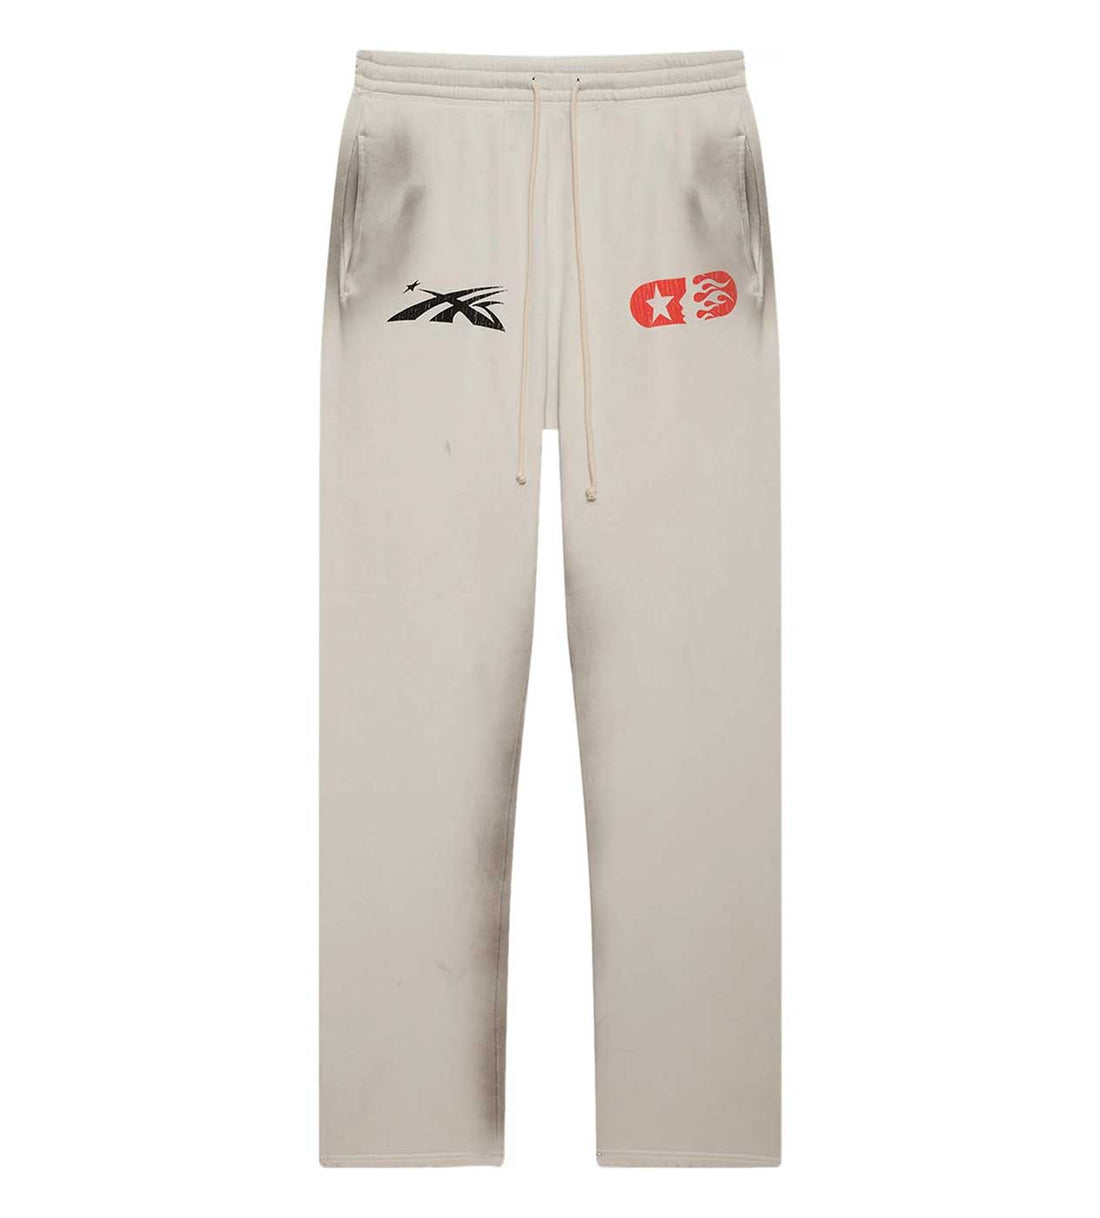 Hellstar Sports Beat Us Sweatpants White front view